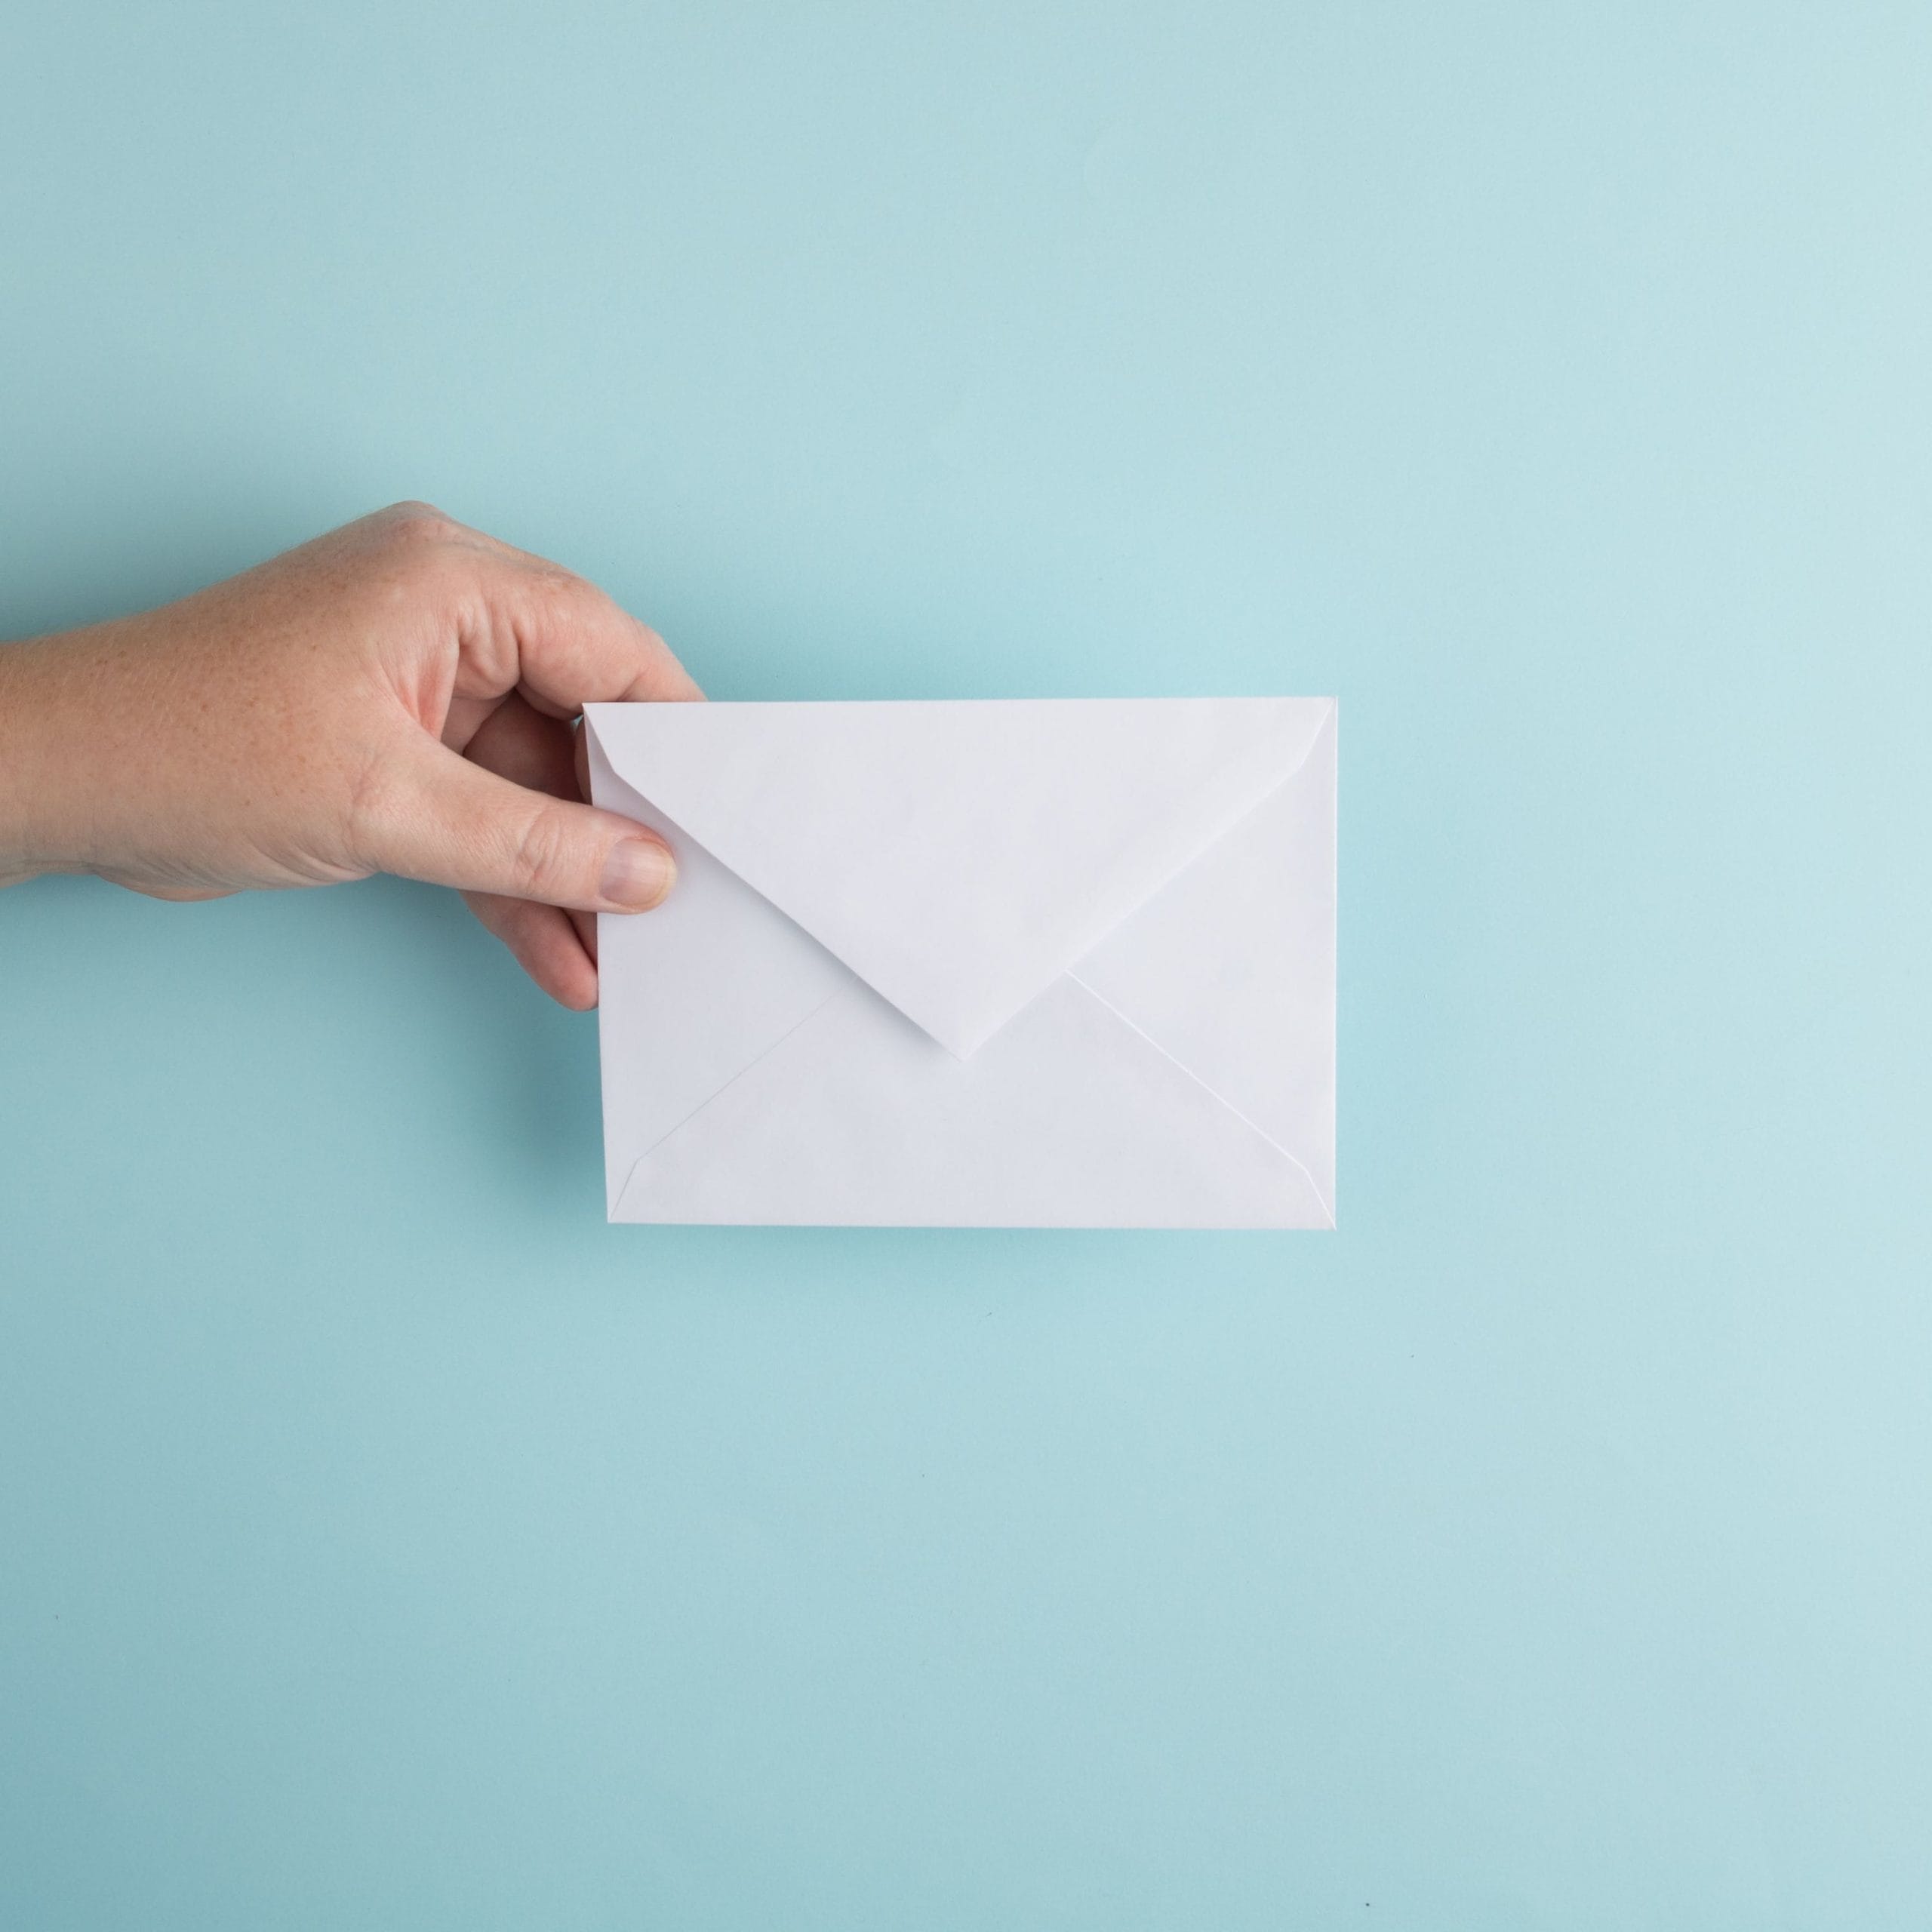 Plain white envelope being held up against a light blue background.